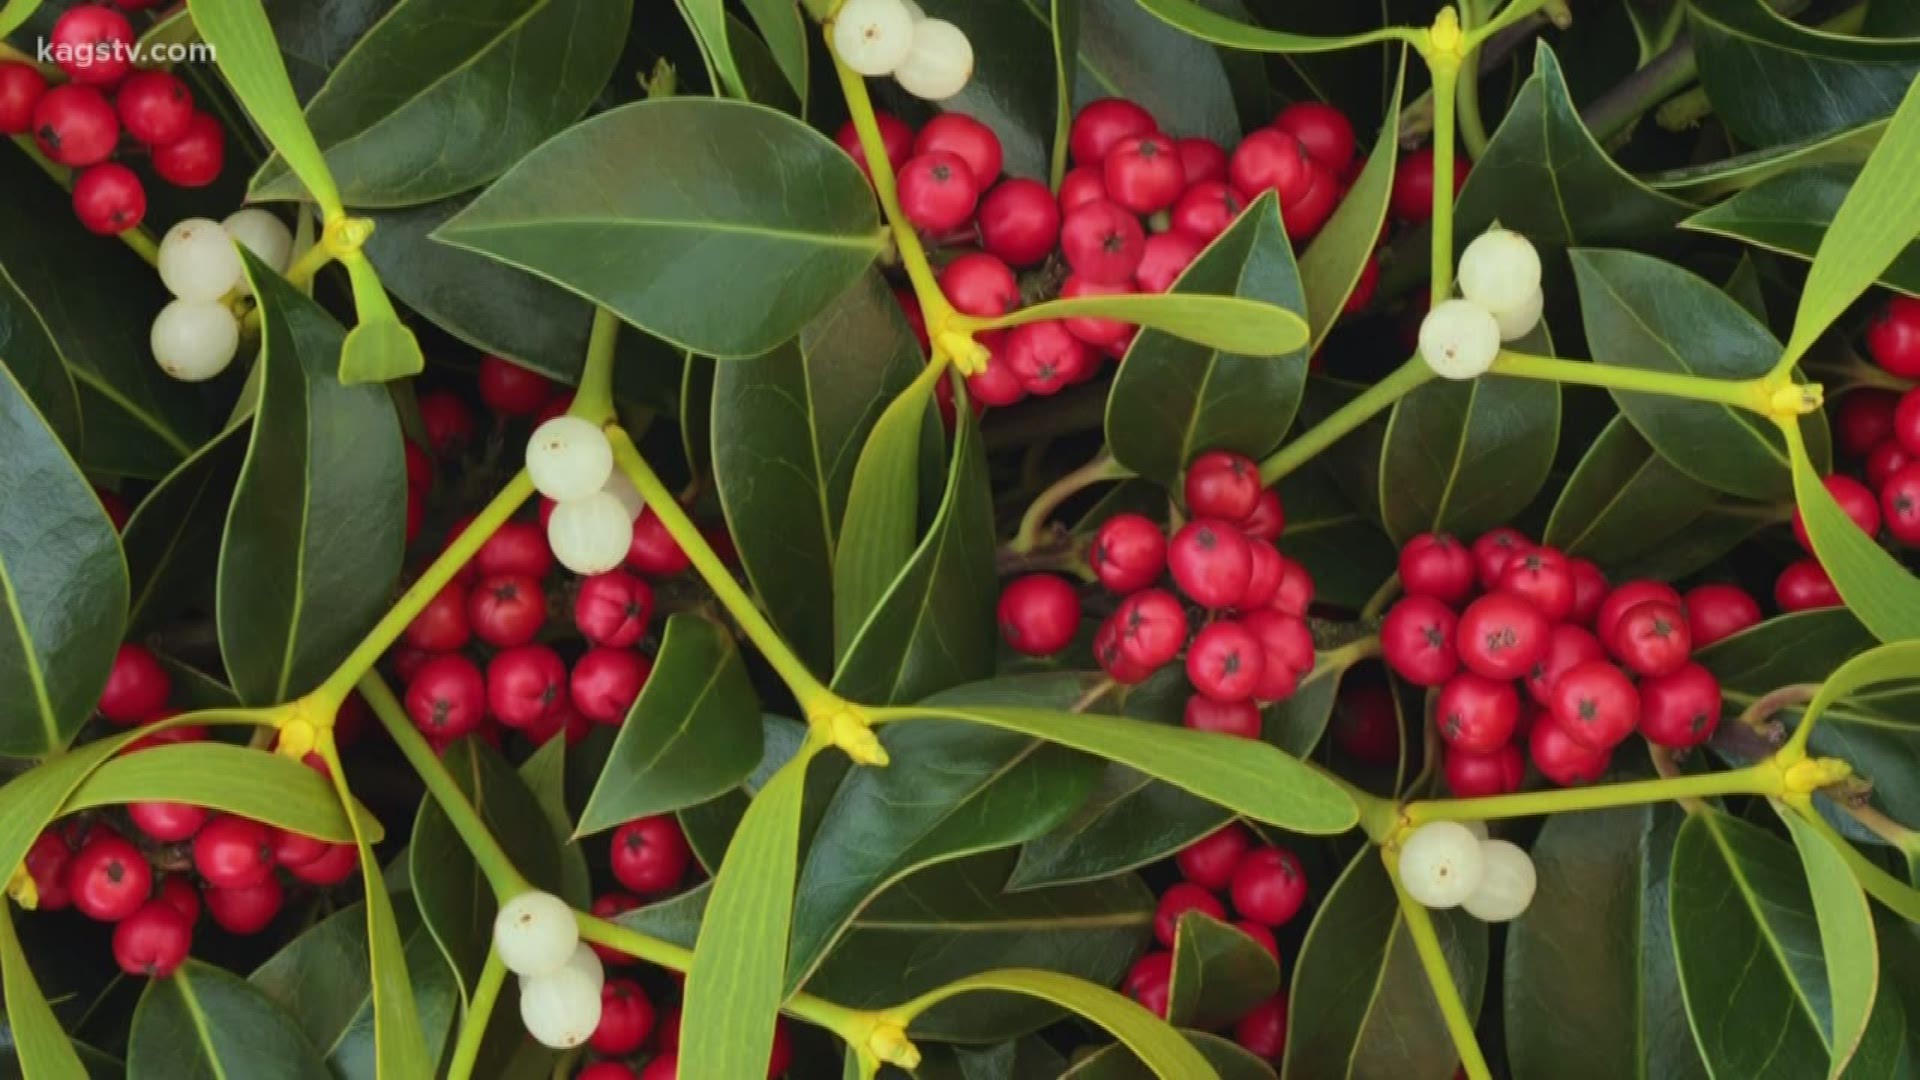 Many have started to decorate for the holidays but a plant that many use for décor, or for something even more, may actually be a danger.